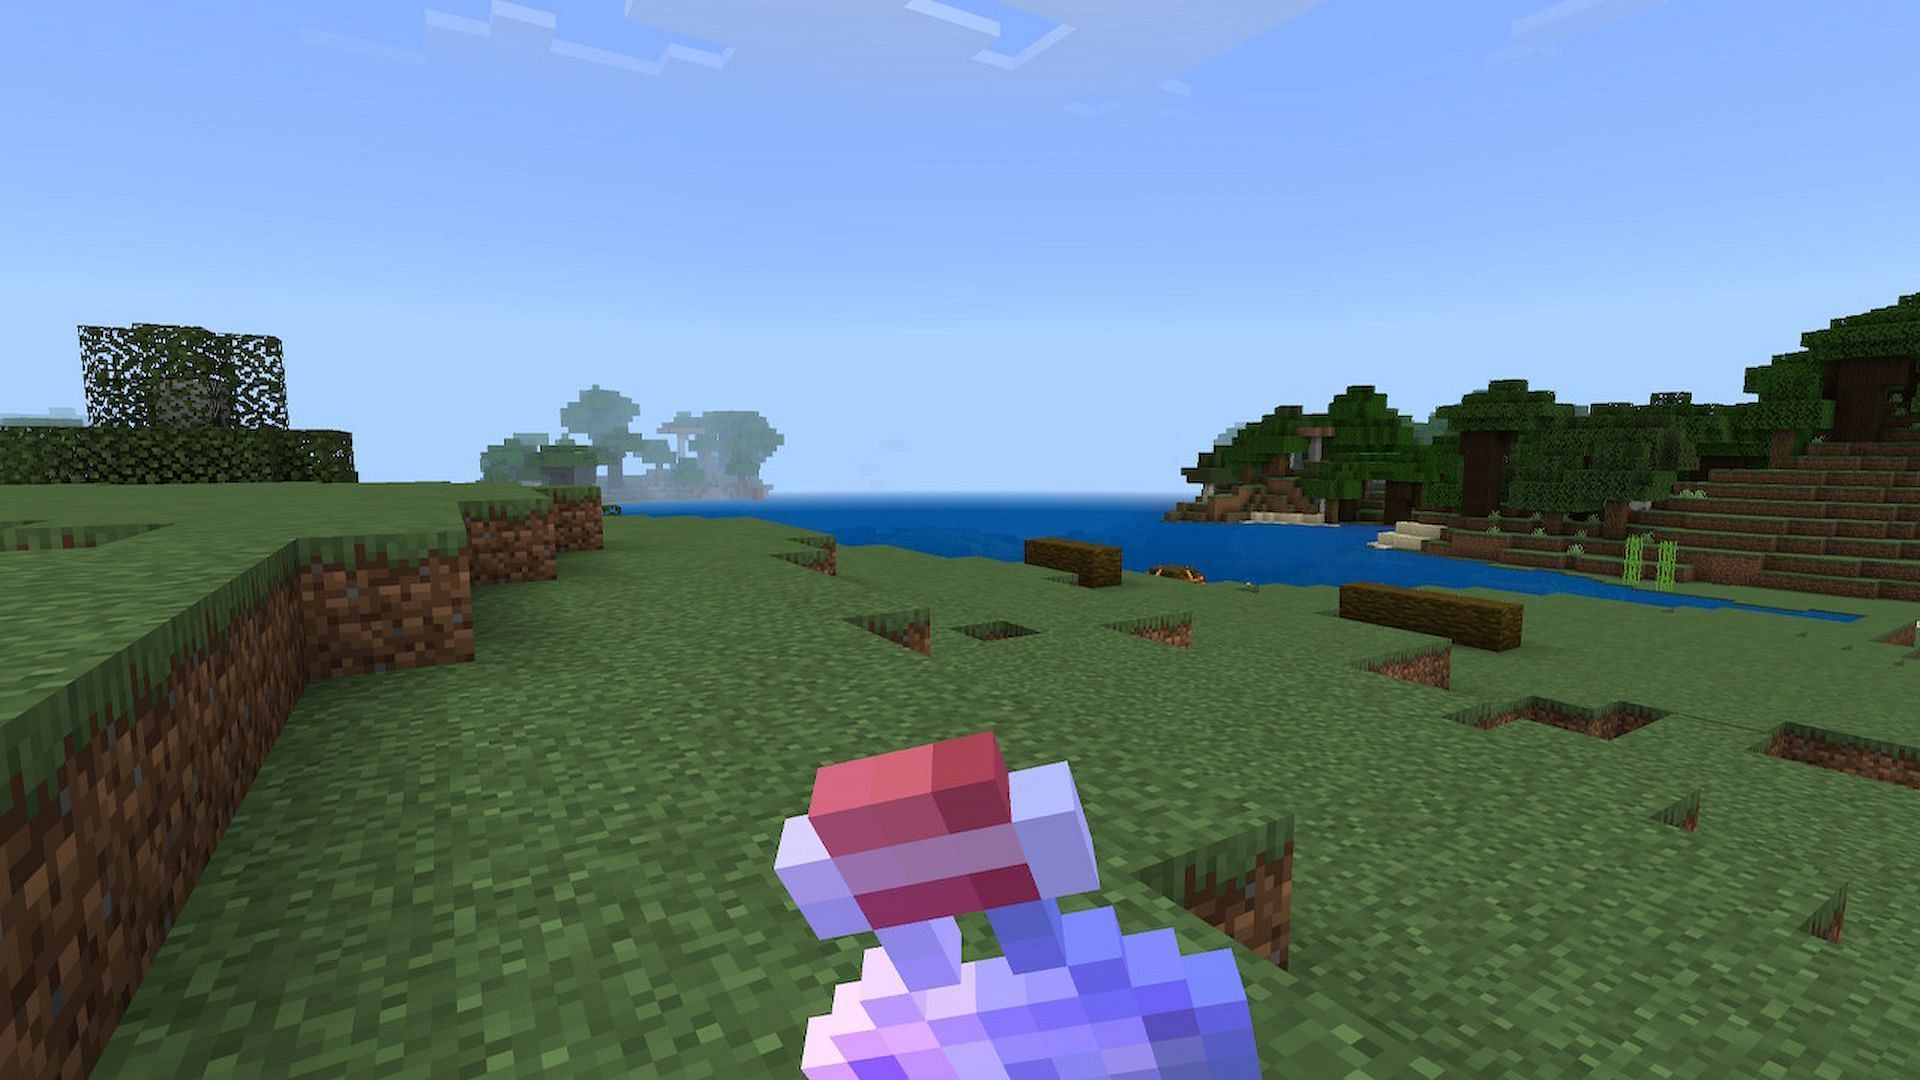 Players can drink swiftness potions or have them be splashed on them in order to gain bonus speed (Image via Minecraft)